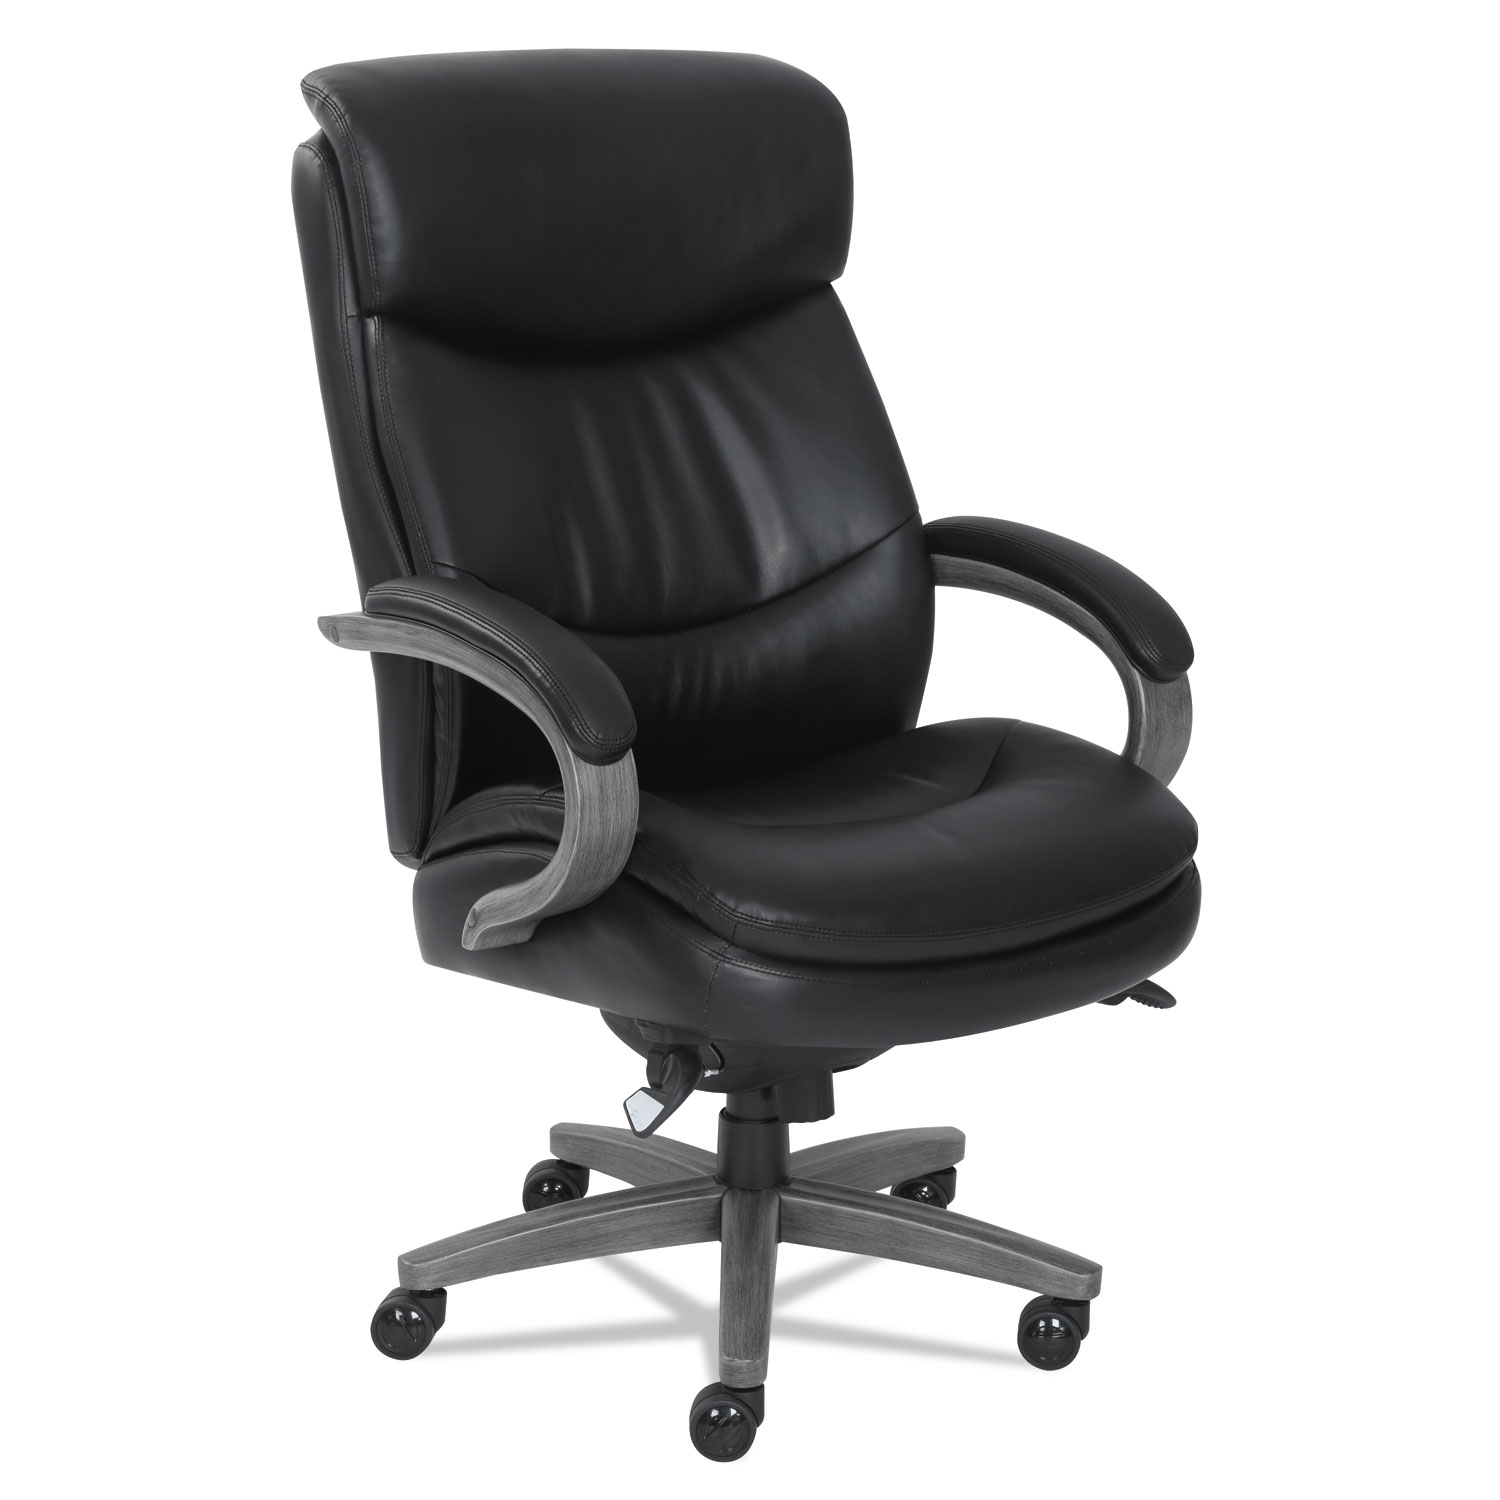  La-Z-Boy 48961A Woodbury Big and Tall Executive Chair, Supports up to 400 lbs., Black Seat/Black Back, Weathered Gray Base (LZB48961A) 